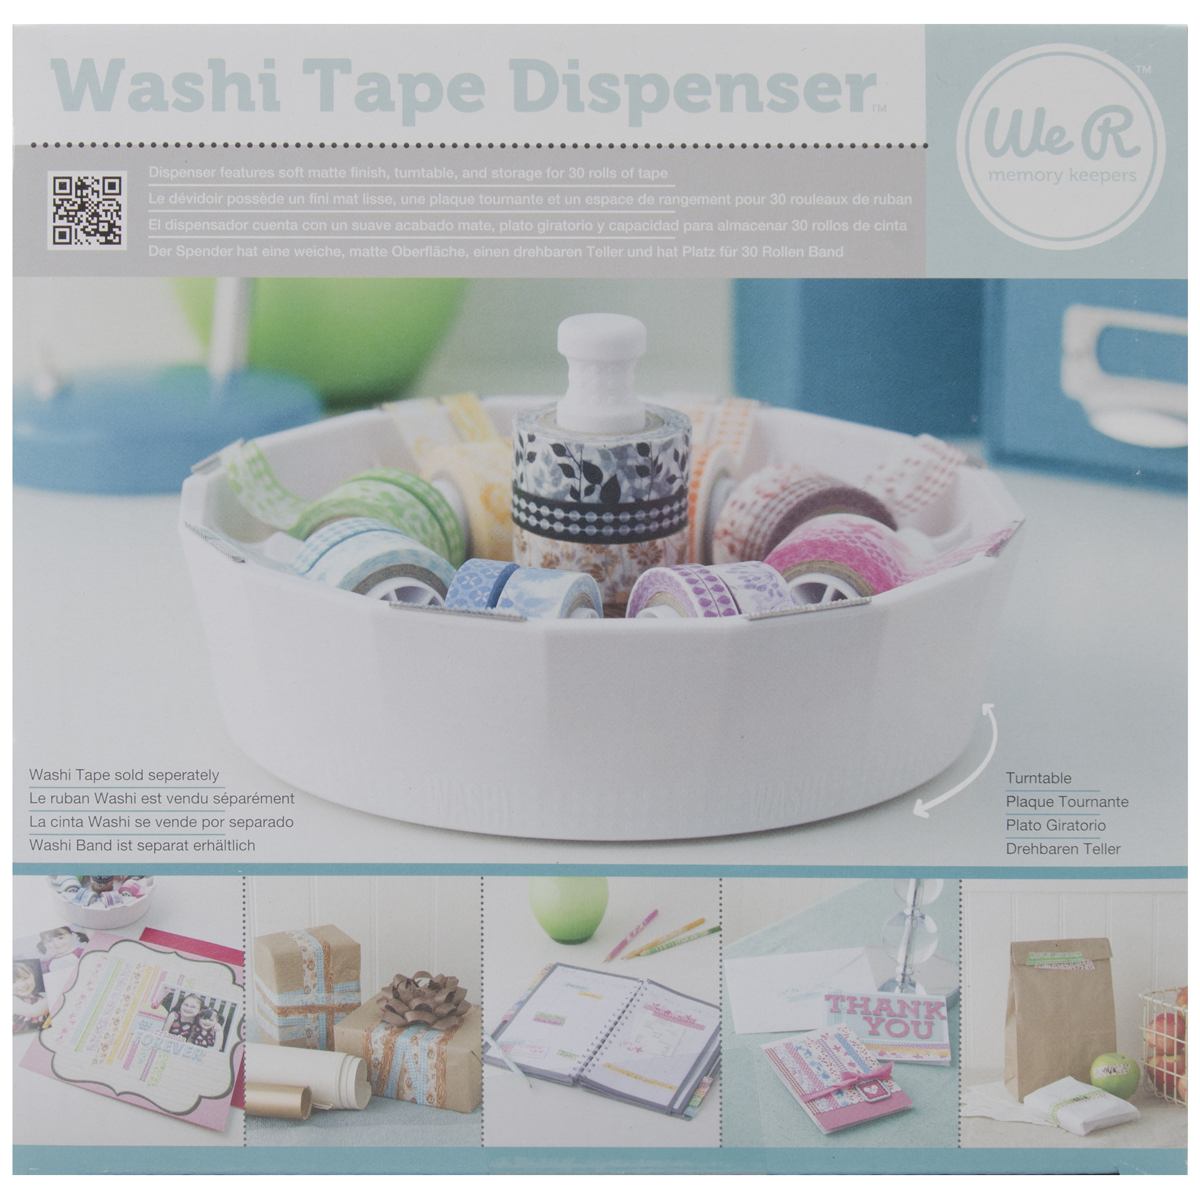 We R Memory Keepers® Washi Tape Dispenser